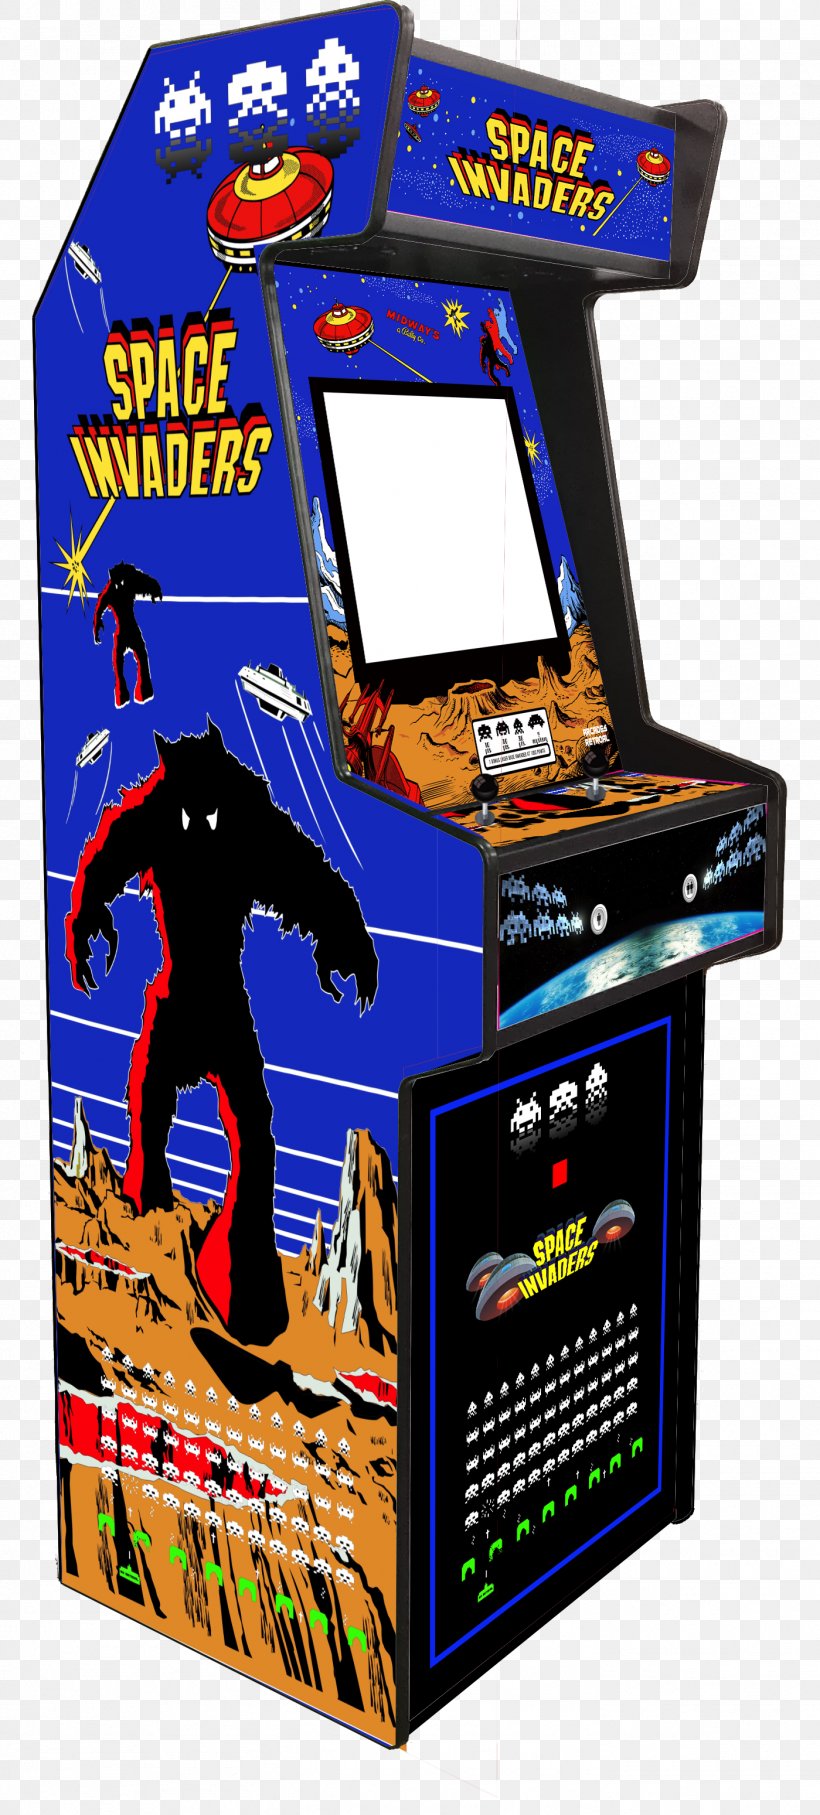 Arcade Cabinet Space Invaders DX Samurai Shodown IV Arcade Game, PNG, 1399x3098px, Arcade Cabinet, Arcade Game, Electronic Device, Games, List Of Space Invaders Video Games Download Free